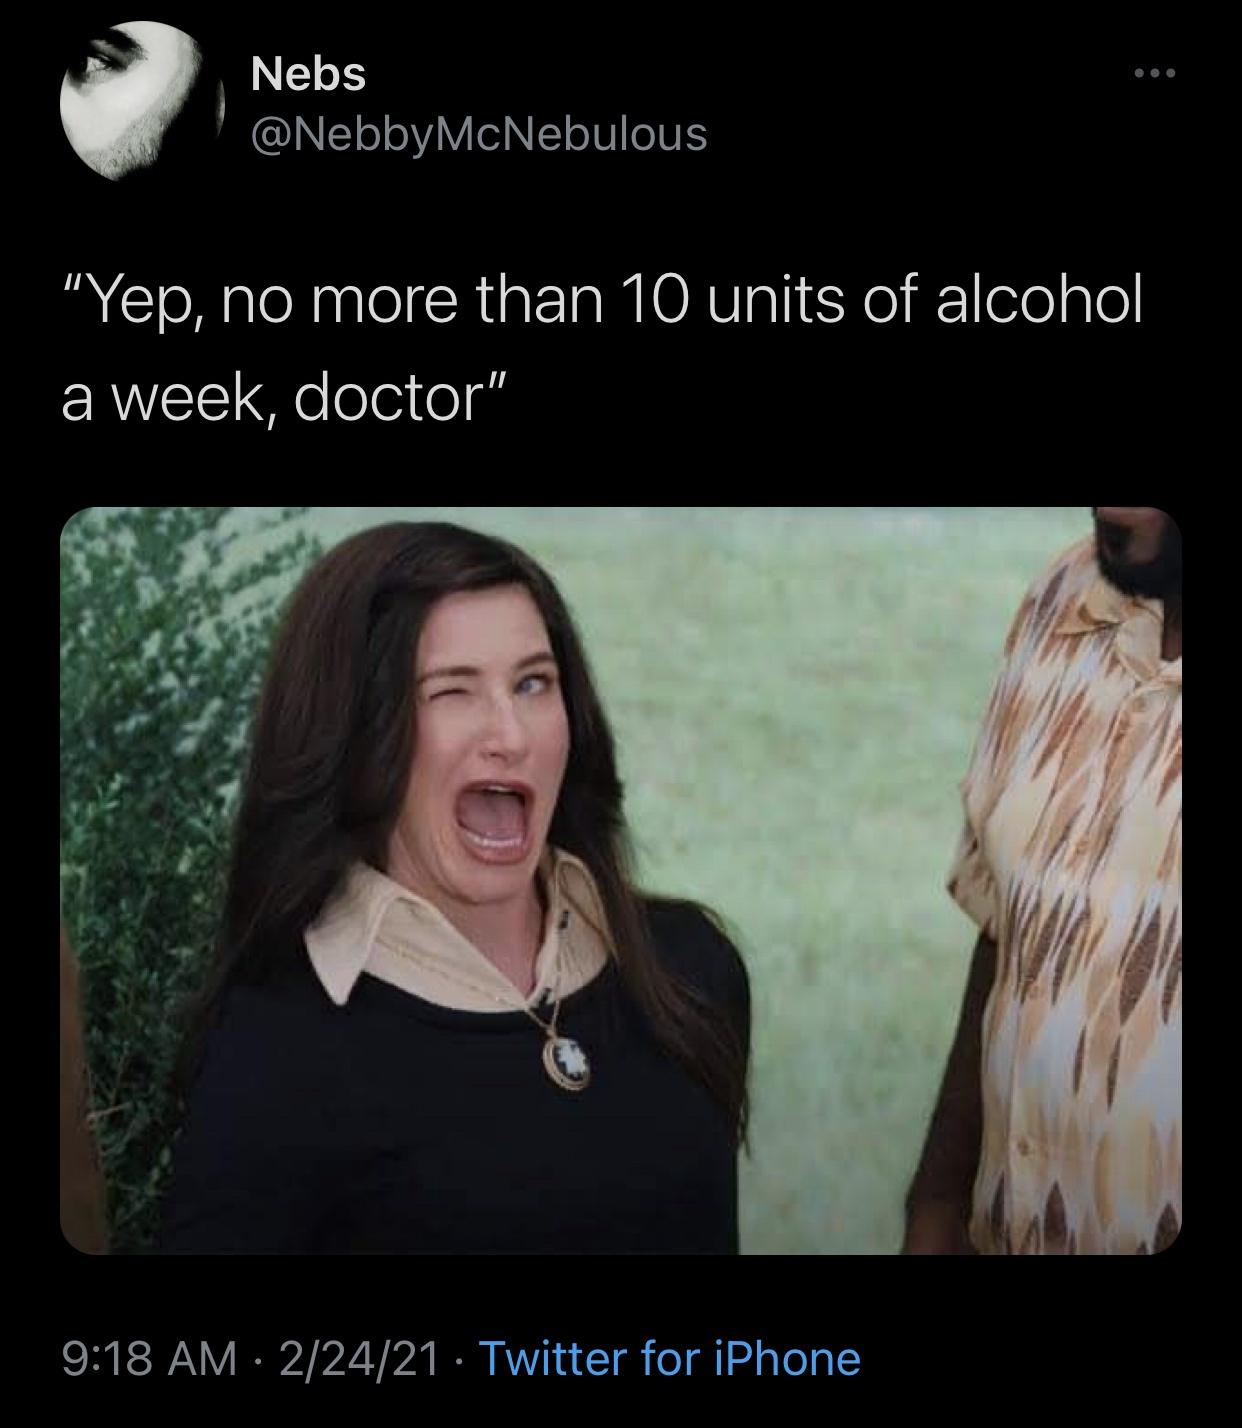 agnes wandavision - Nebs "Yep, no more than 10 units of alcohol a week, doctor" 22421 Twitter for iPhone